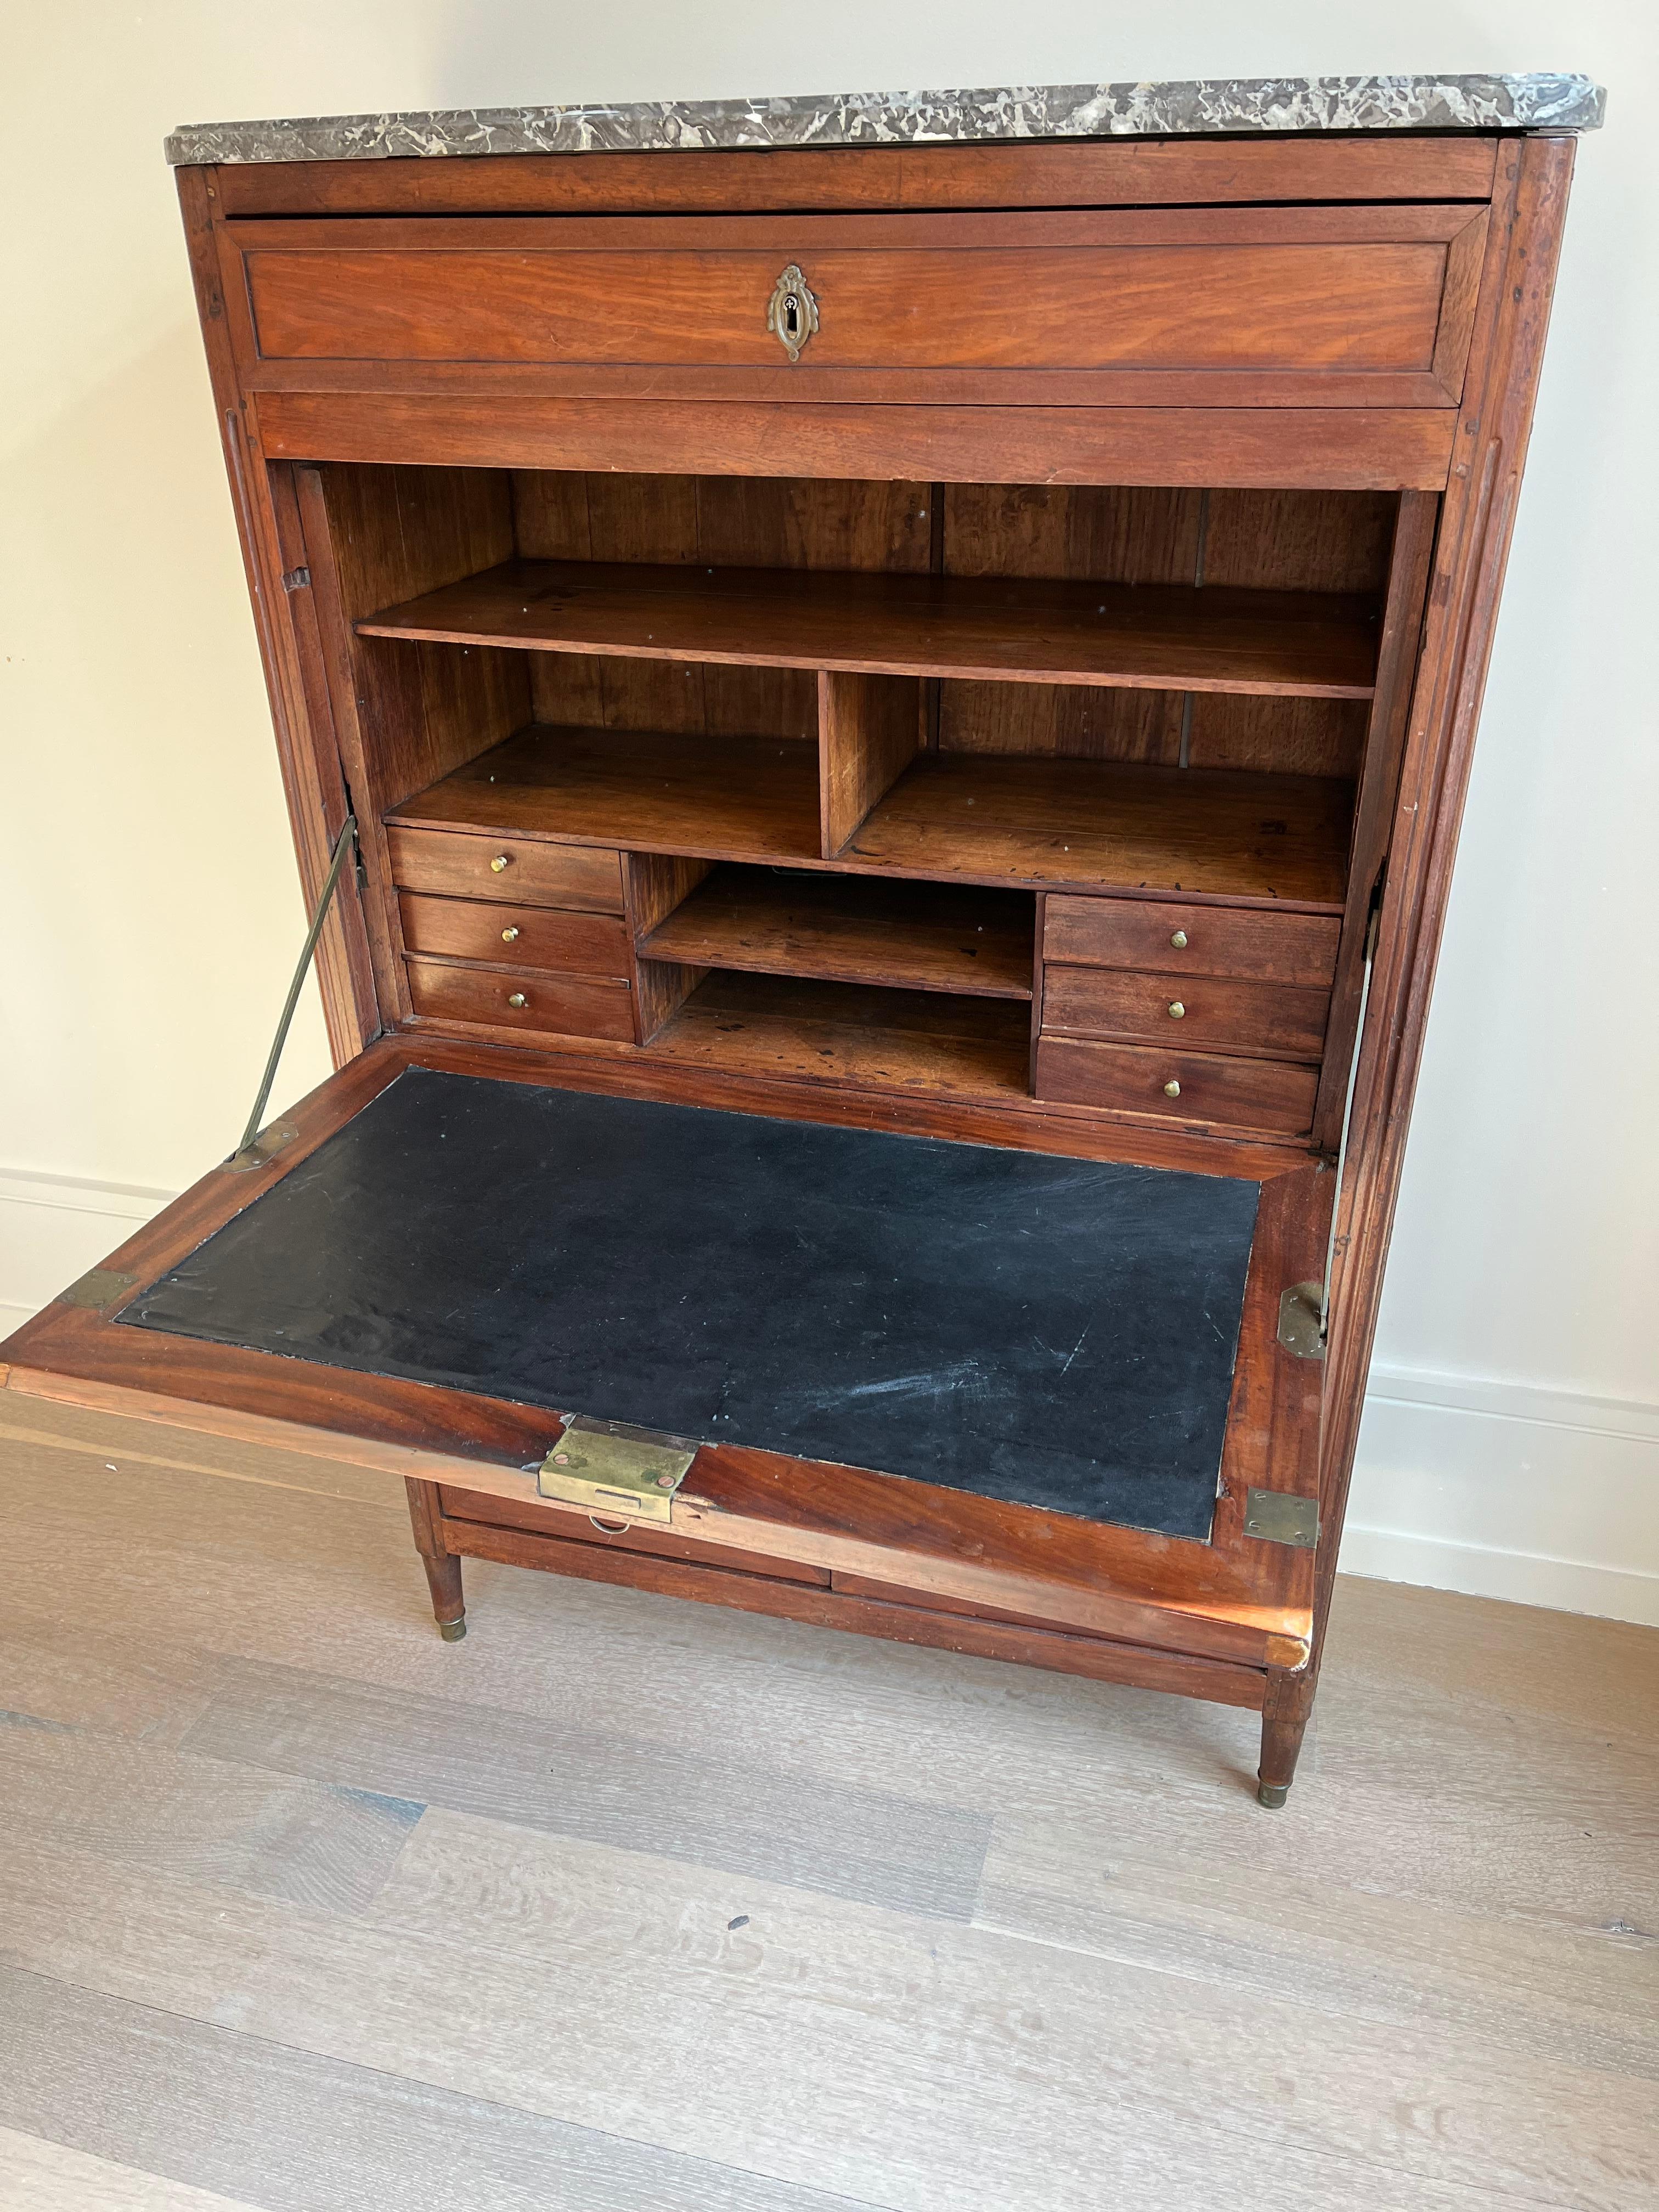 19th century French mahogany Secre´taire a` Abattant / fall-front desk with marble top. There is a single slim drawer at the top with a decorative escutcheon. The front of the desk folds down to reveal an interior outfitted with six smaller drawers,